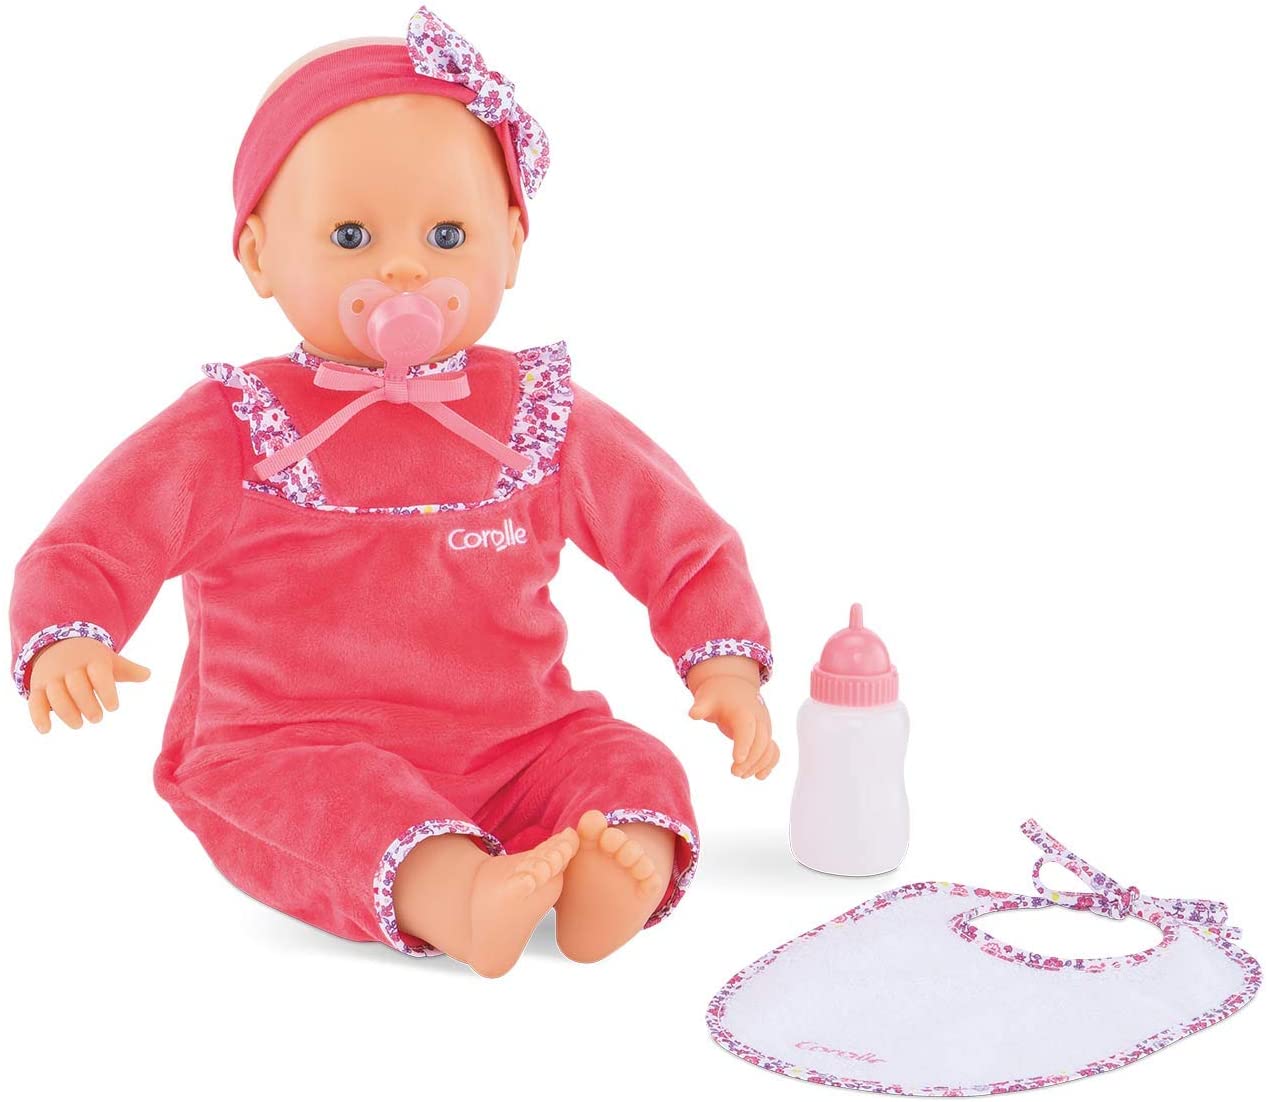 (OPEN BOX) Corolle Mon Grand Poupon Lila Chérie - Large 17" Interactive Toy Baby Doll with 3 Accessories, for Ages 2 Years